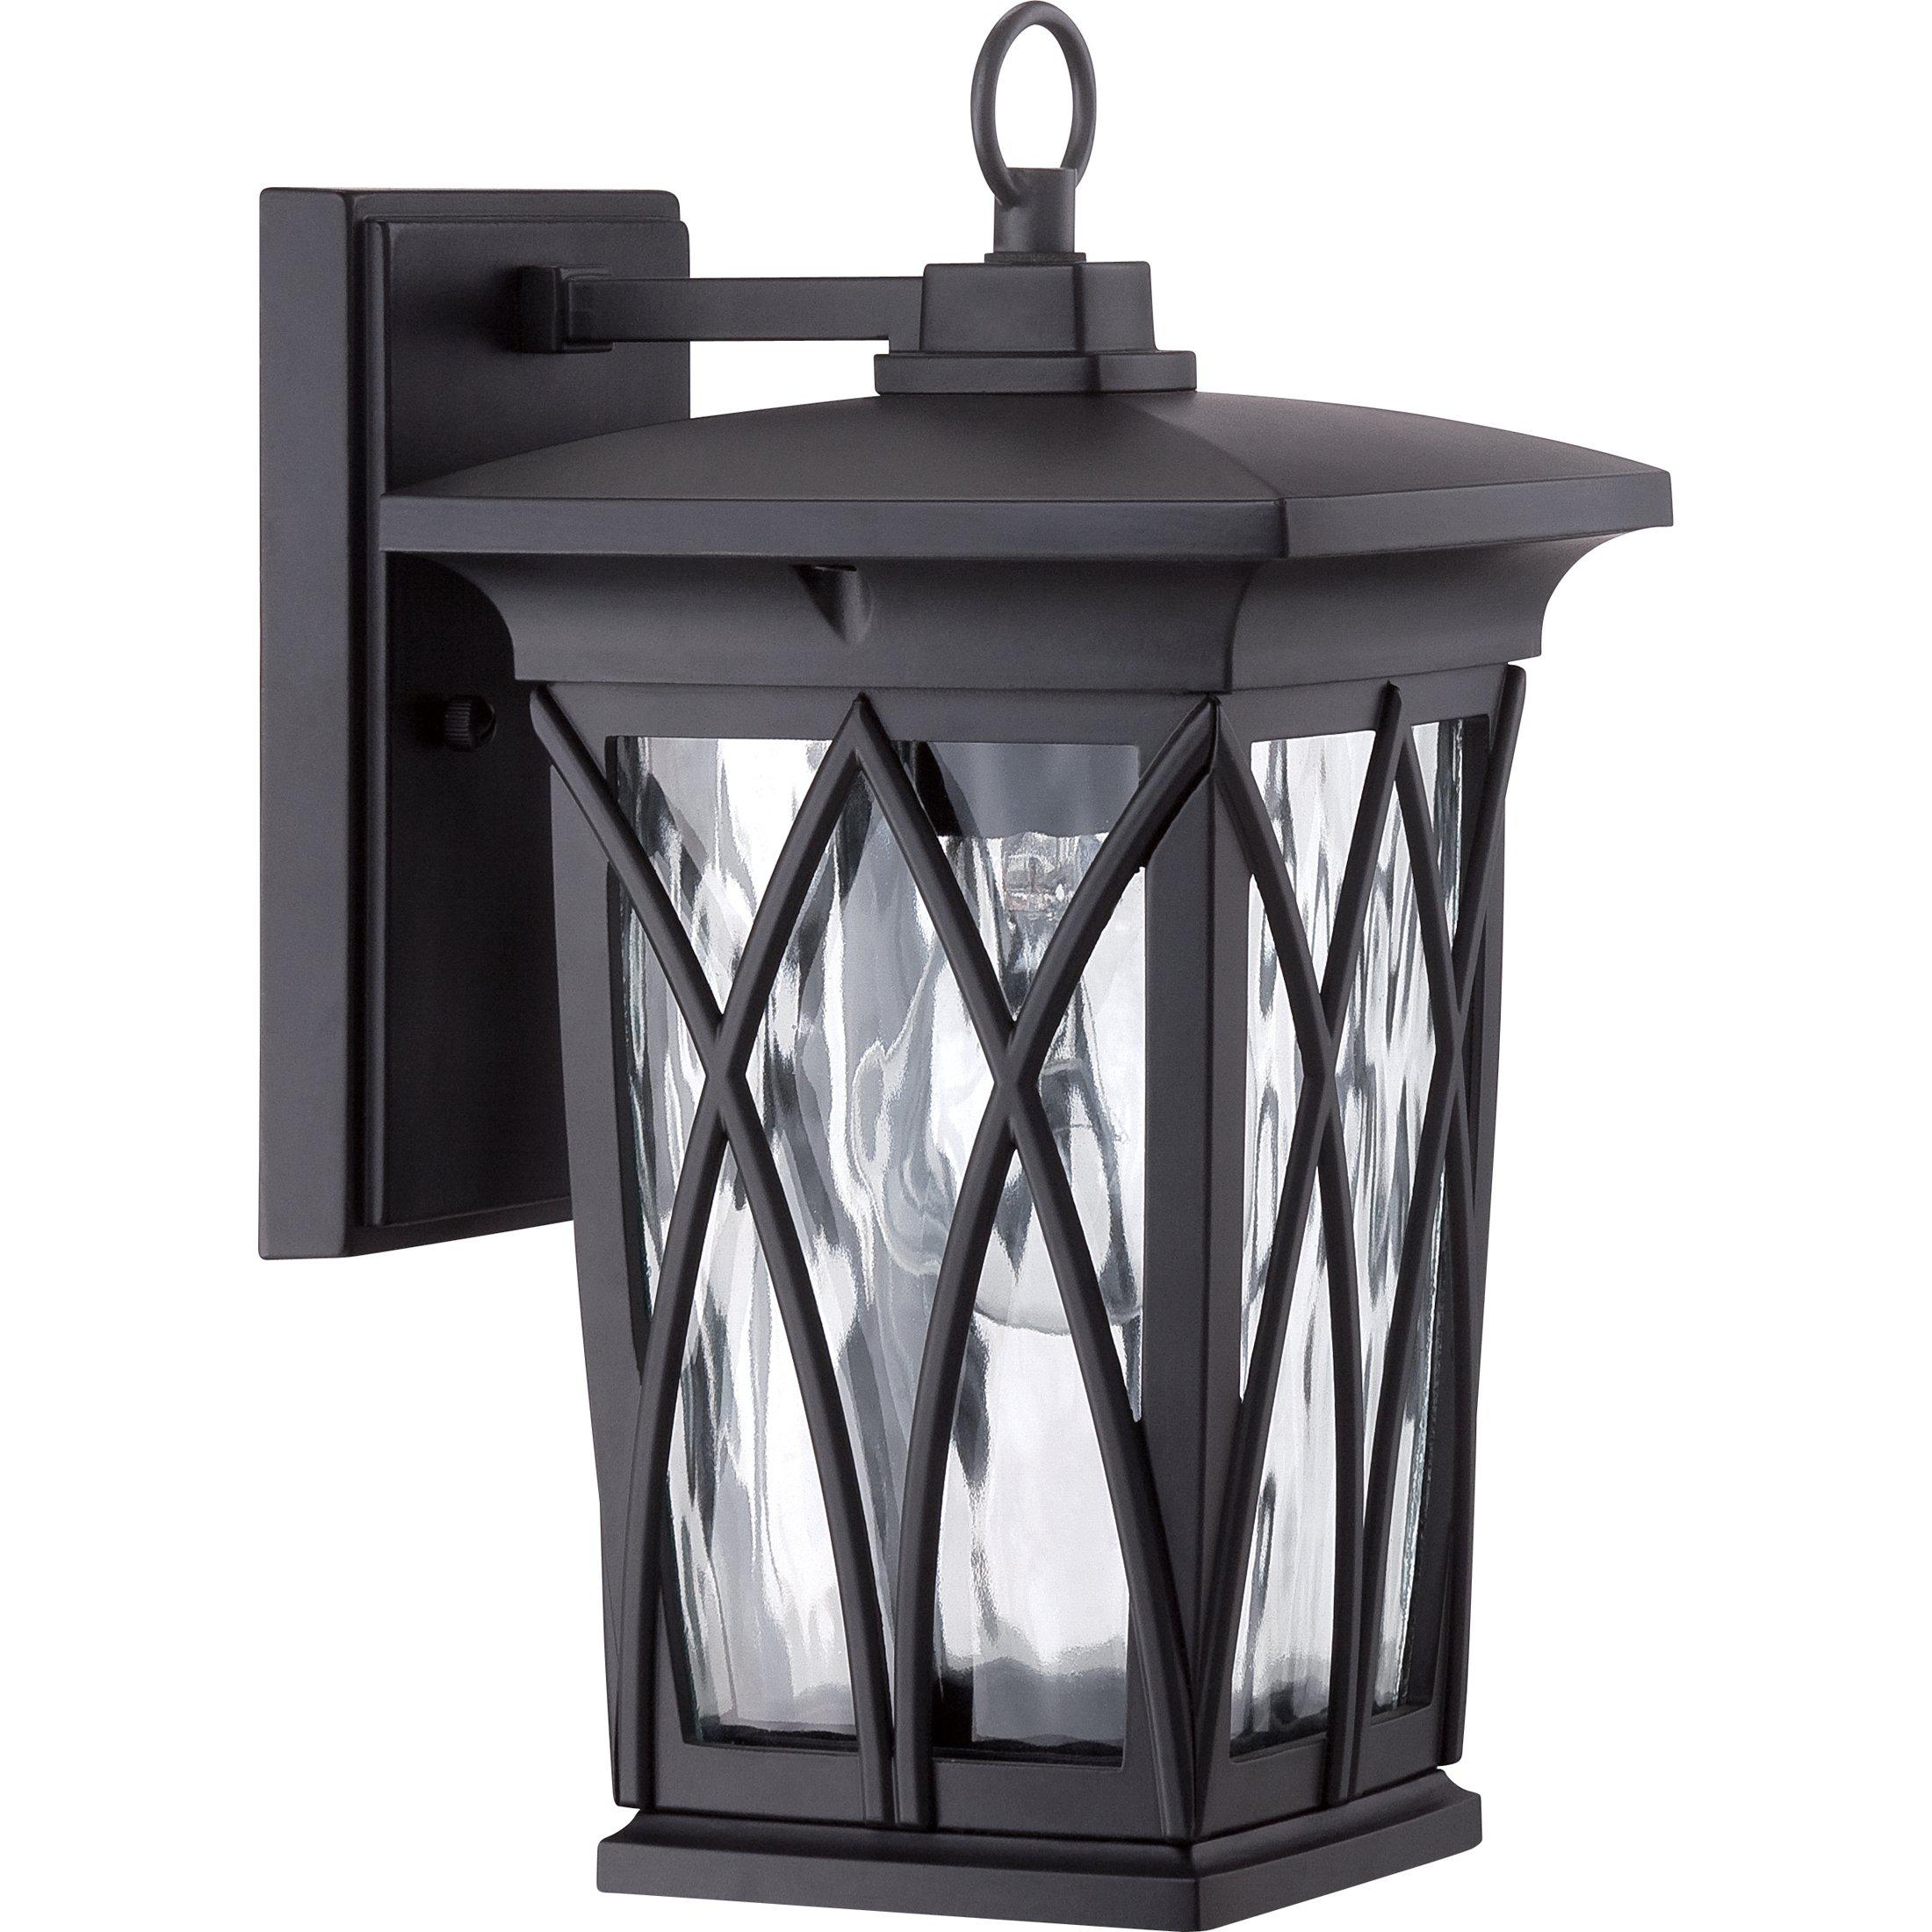 Quoizel Grover Outdoor Lantern, Small